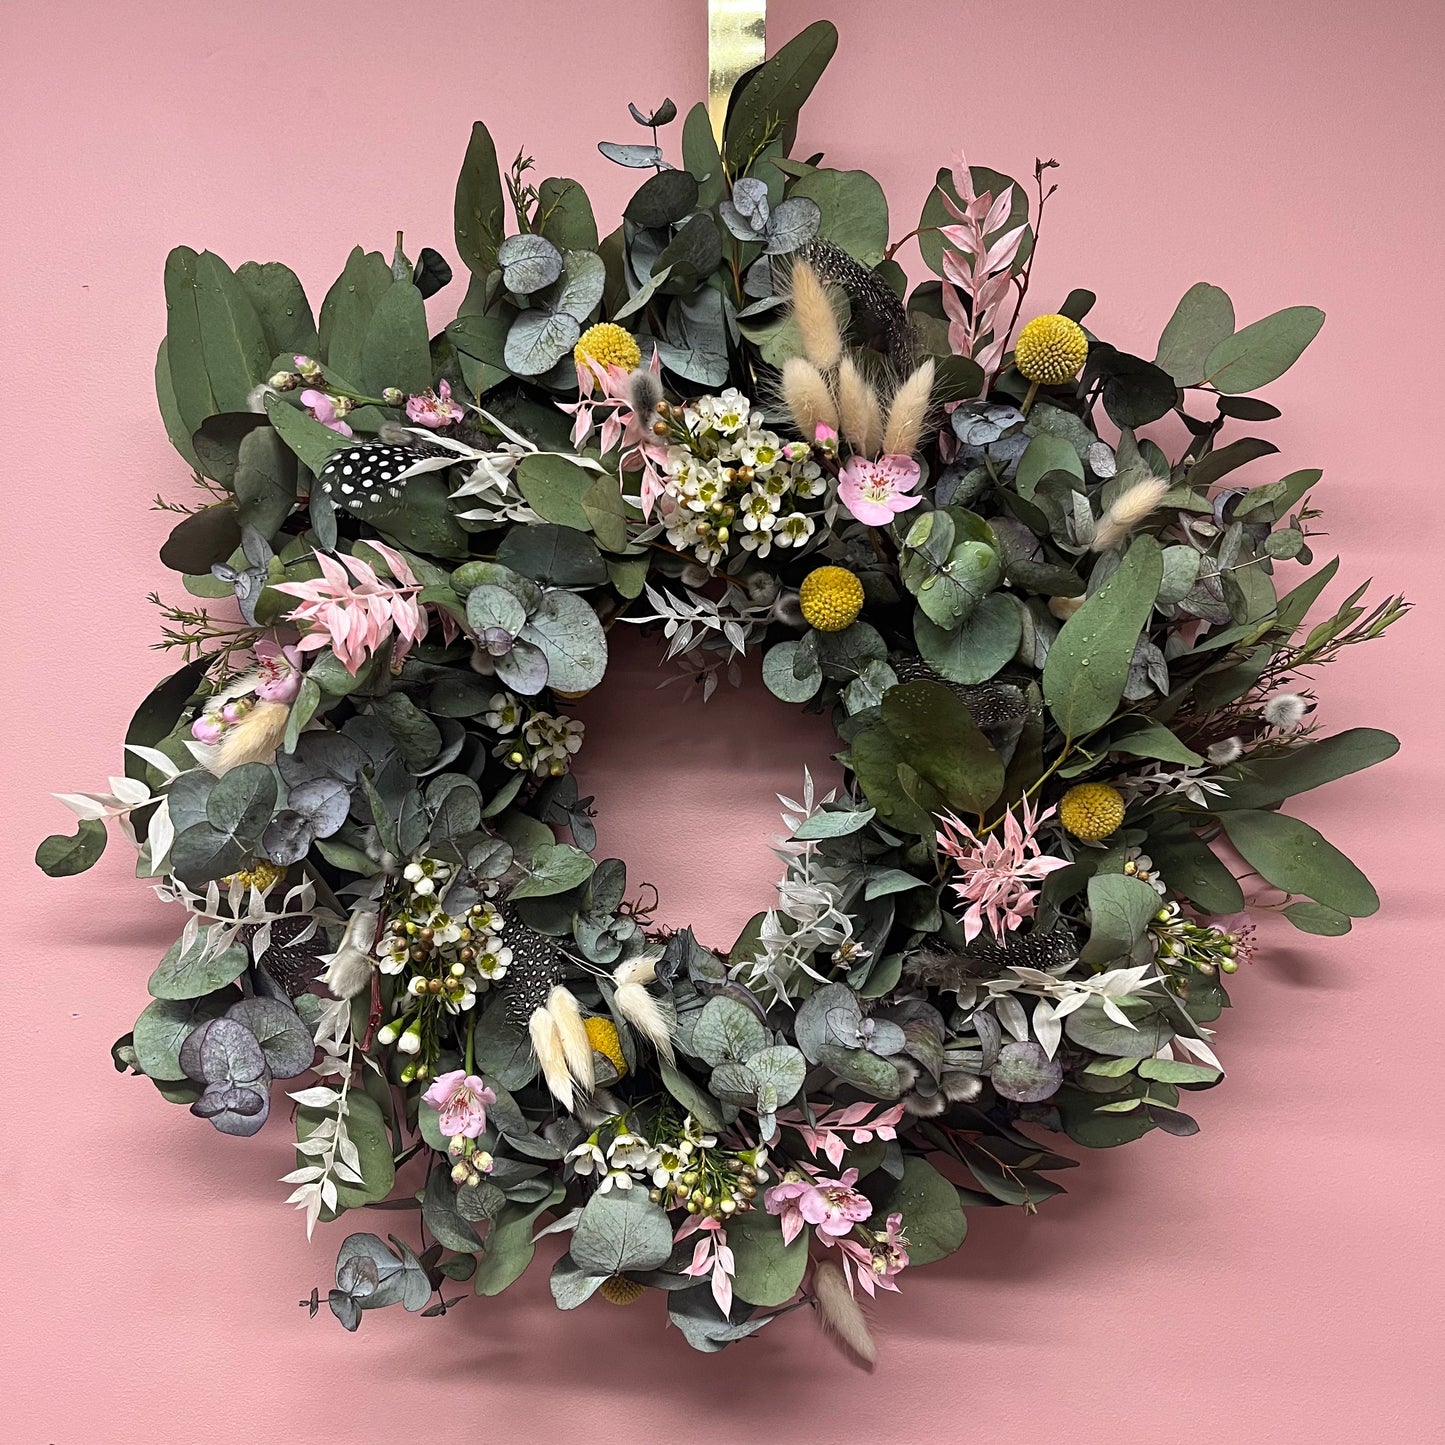 Spring Wreath Workshop Wednesday 27th March 5-7pm